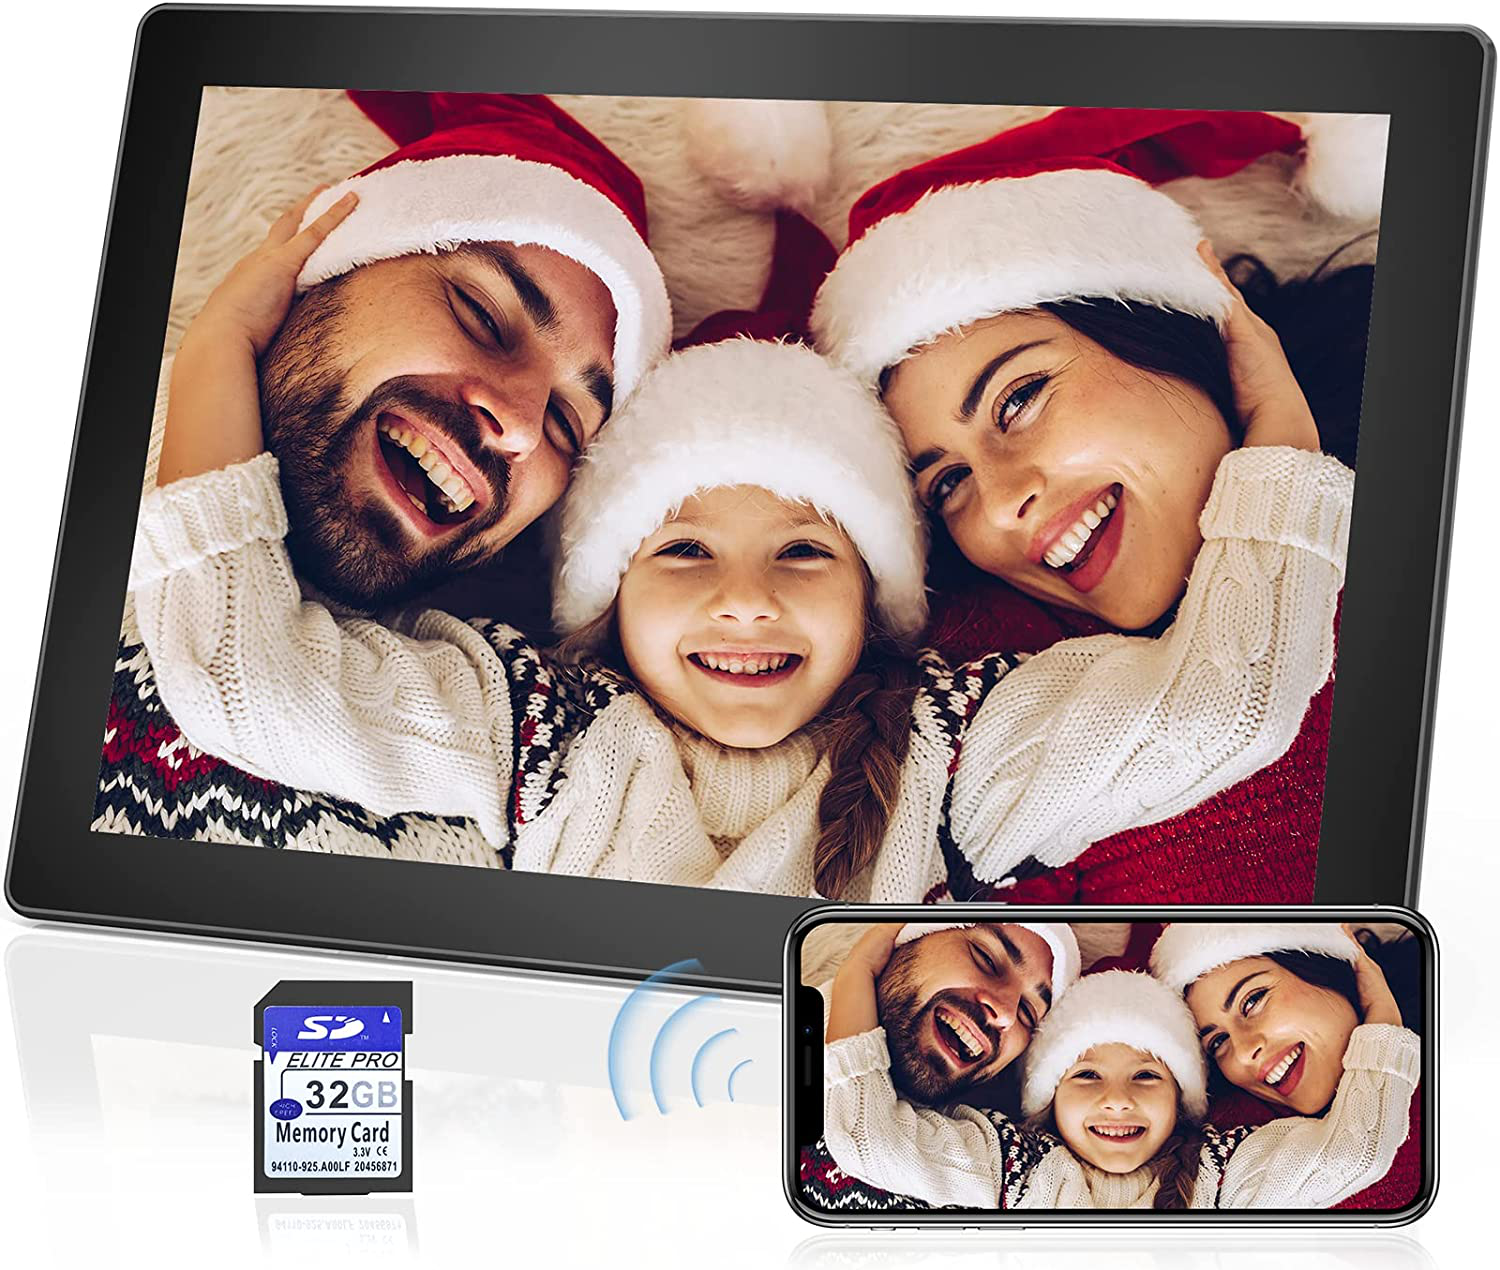 Digital Picture Frames 7 Inch IPS Screen Digital Photo Frame with Remote Control 16:9 Electronic Photo Albums 1080P Video Music 1280X800 Photo Slideshow Calendar 32GB SD Card